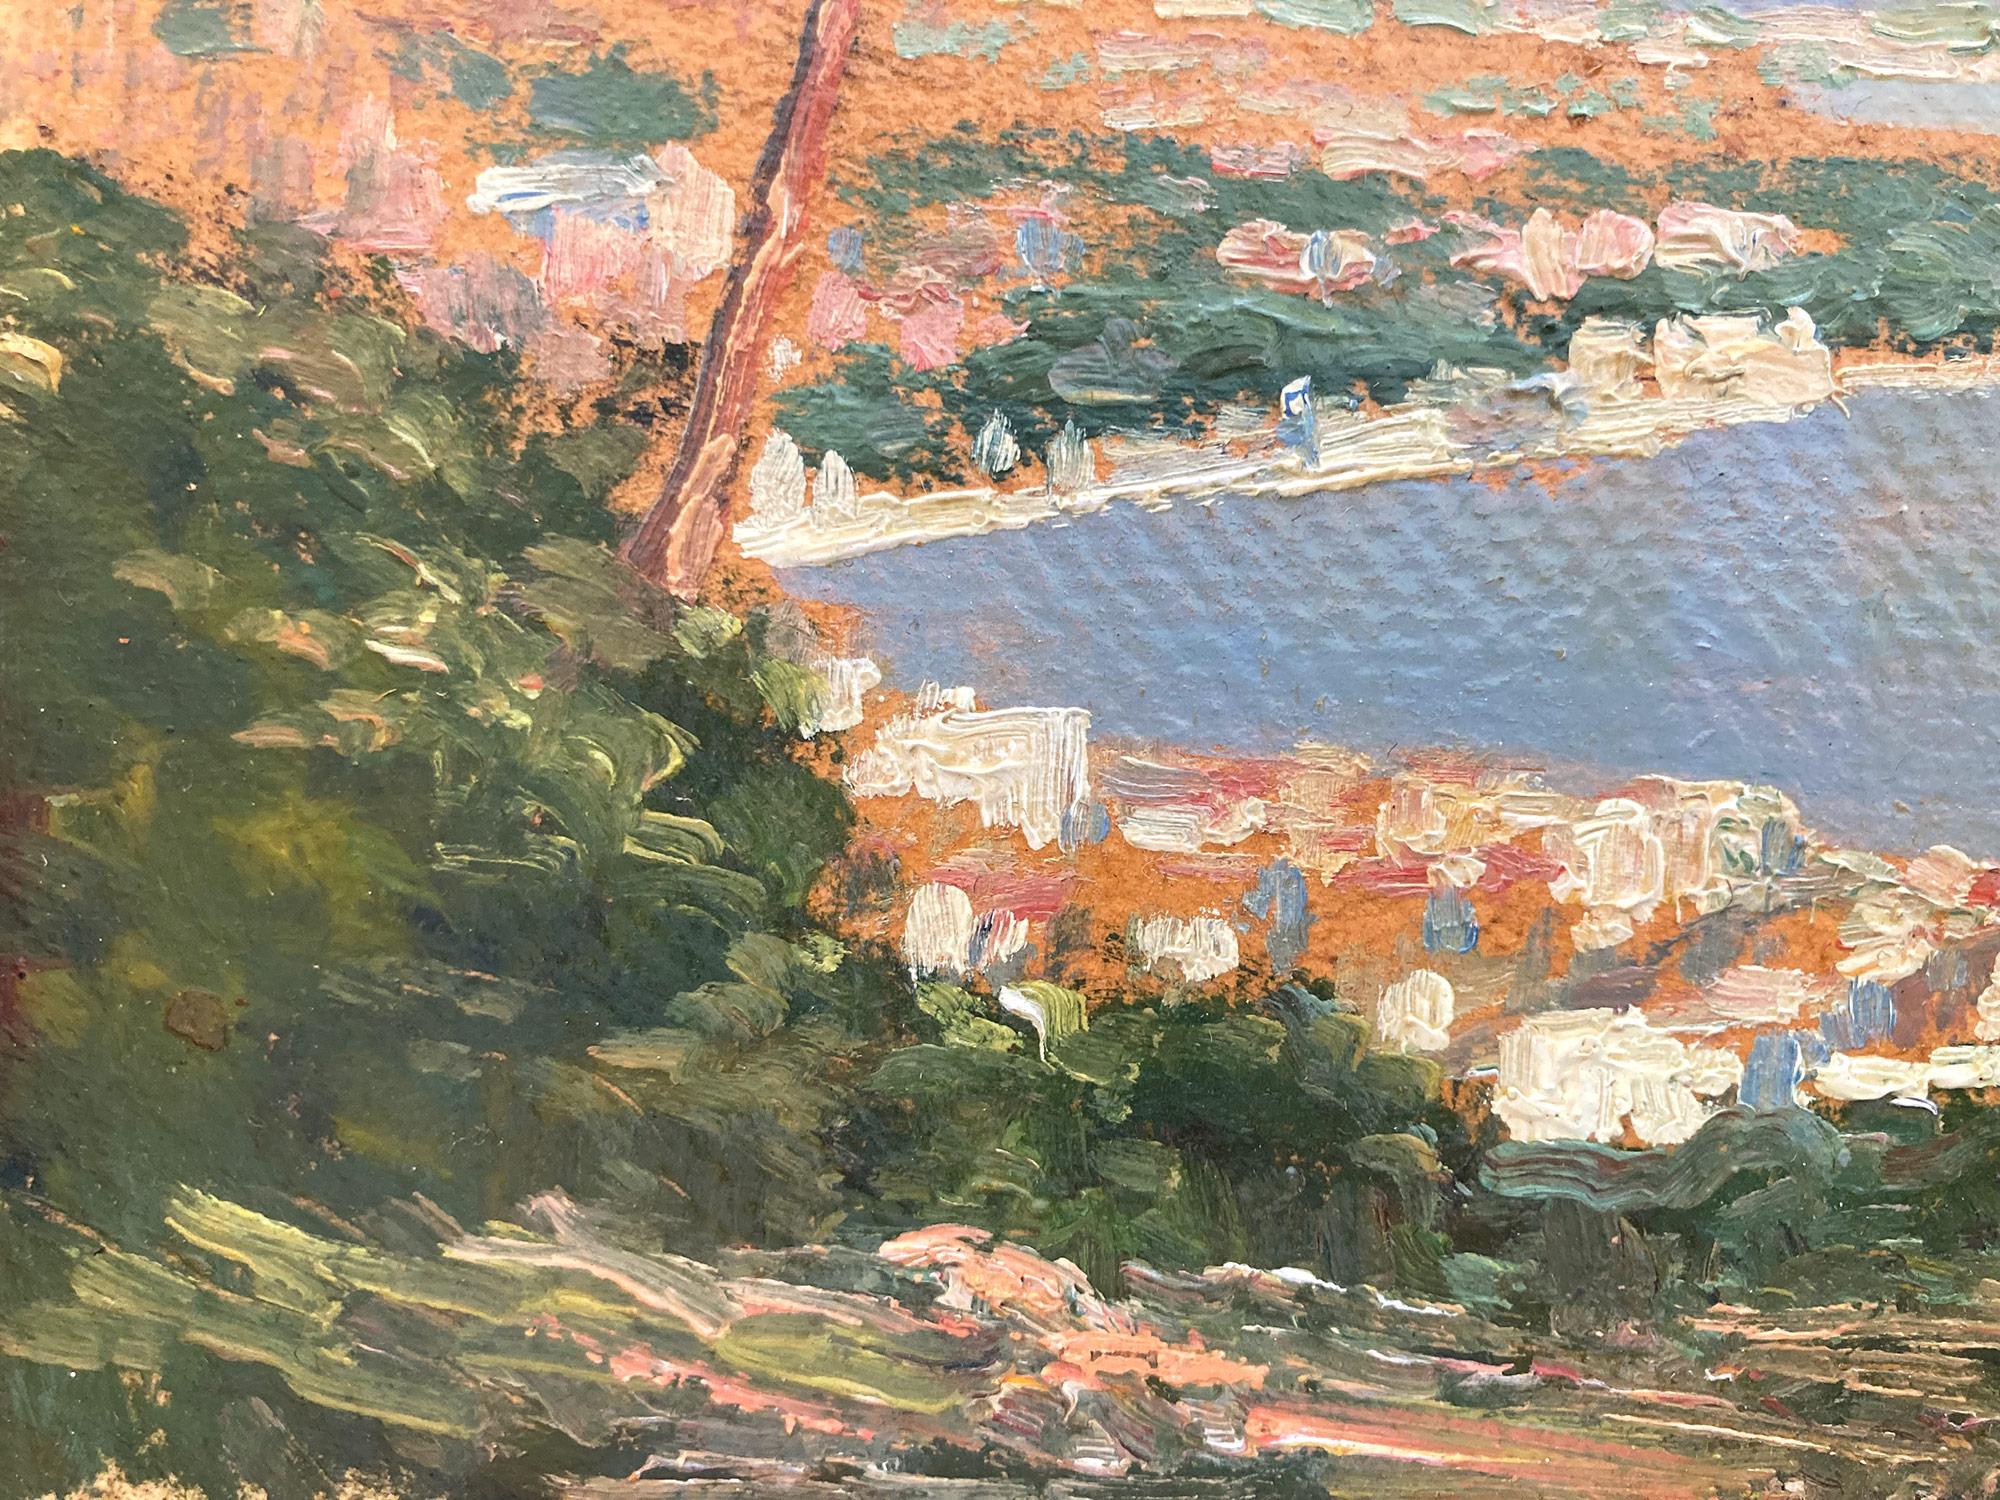 A stunning oil painting scene depicting a Capri coastal view from the 20th Century. The rich color tones and impressionistic brushwork is done with both detail and precision. The warmth of the sun is felt on this beautiful day with many trees and